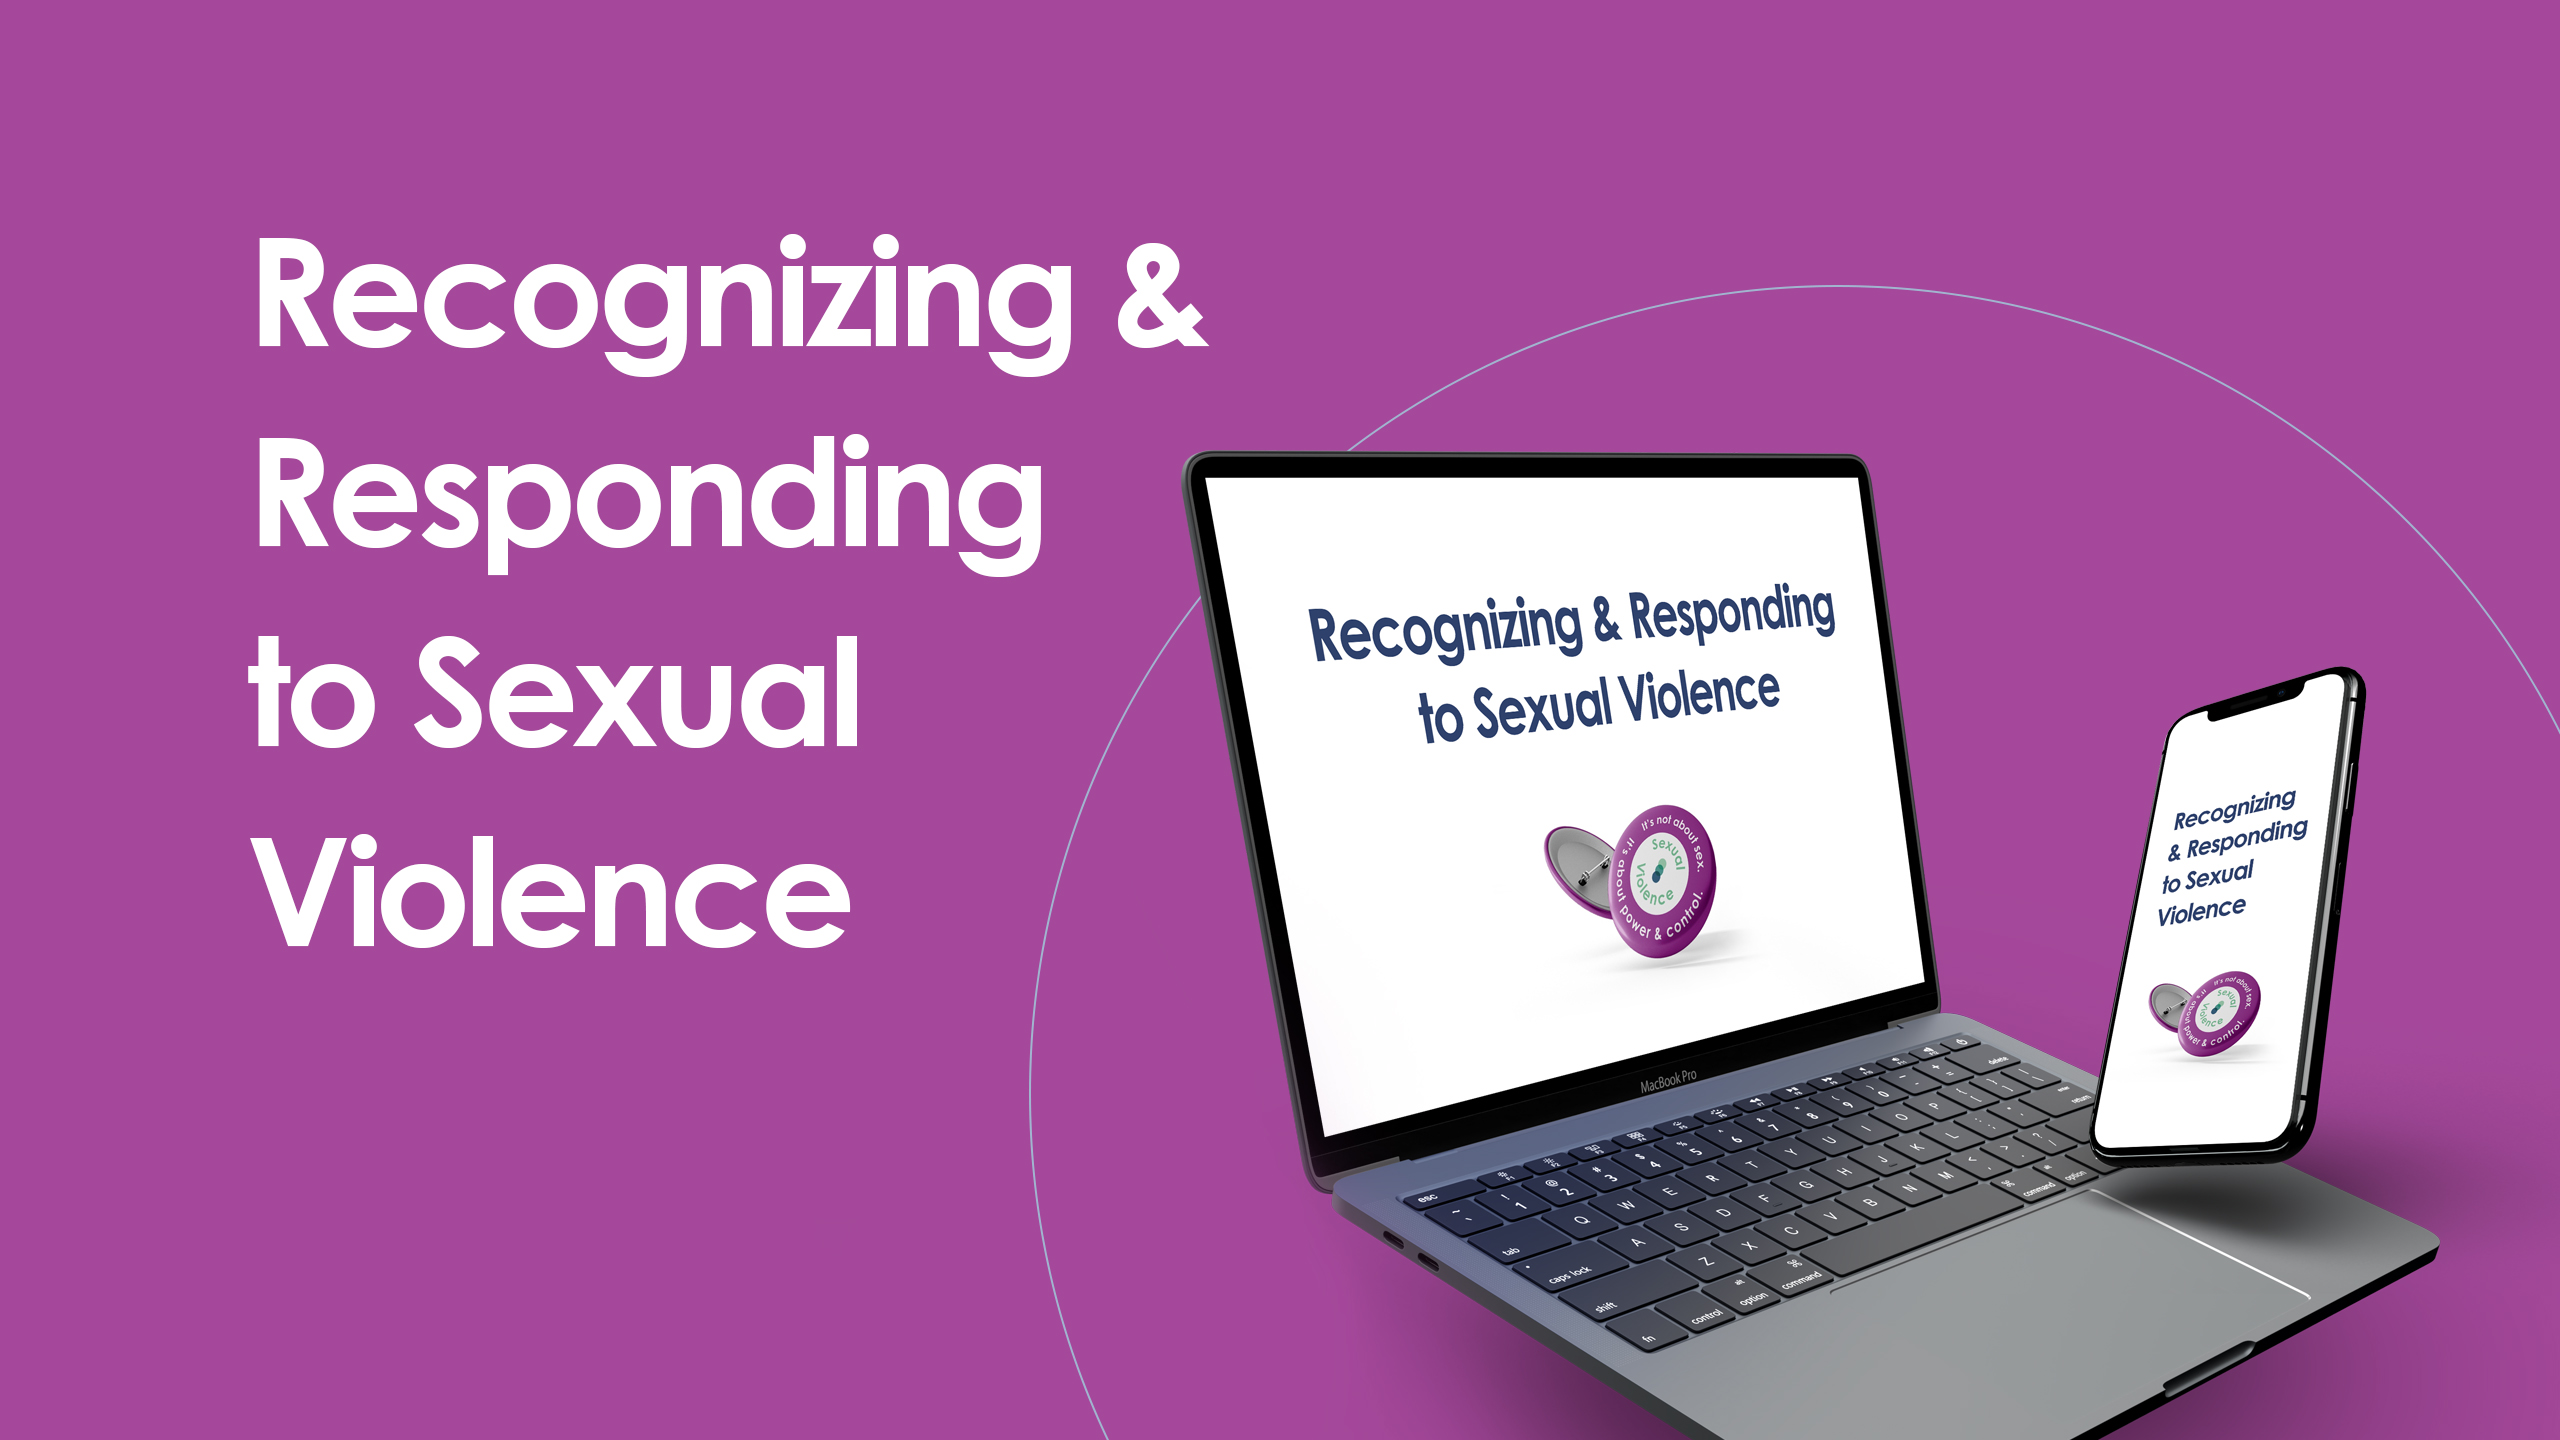 Purple background with white text that says "Recognizing & Responding to Sexual Violence"